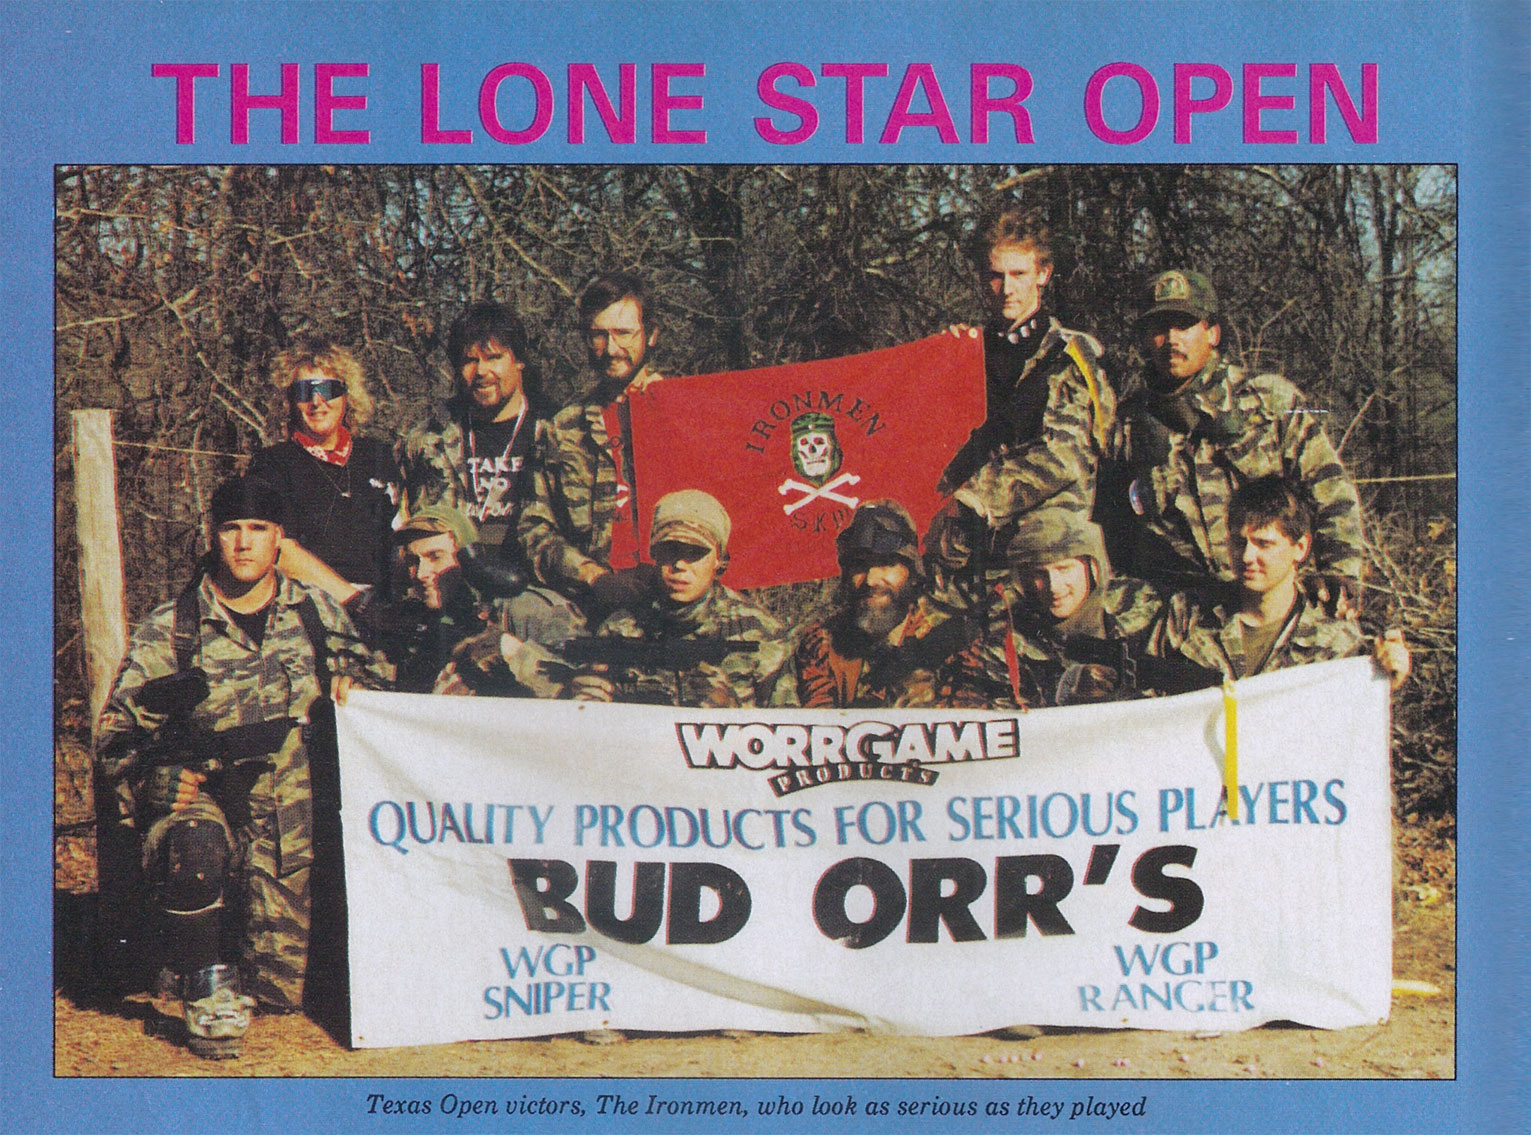 Ironmen at the Lone Star Open 1991